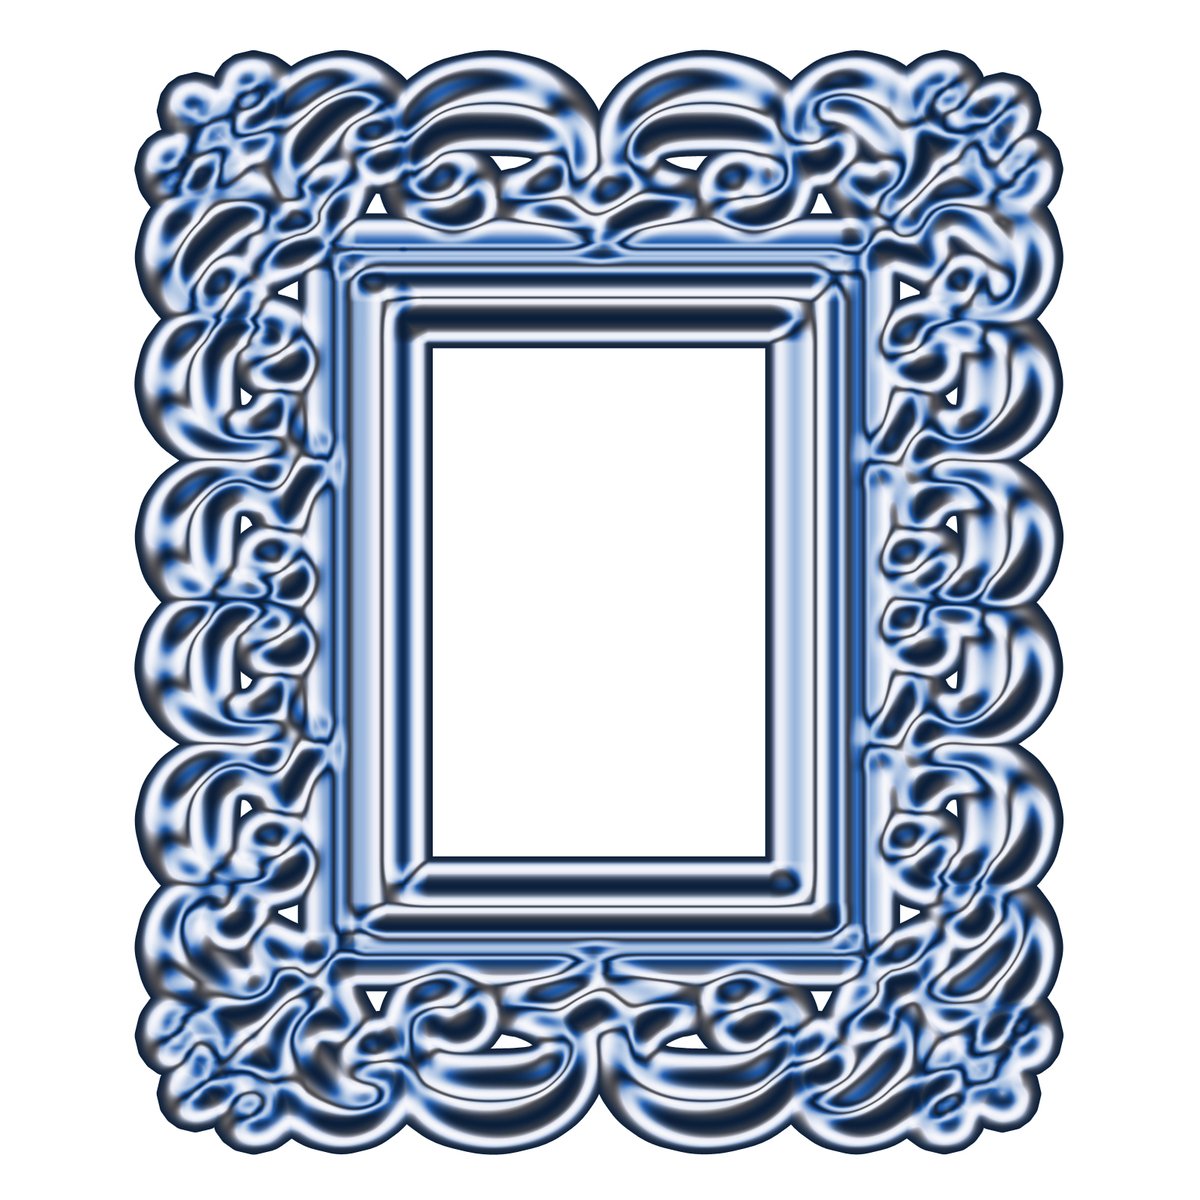 an artistic blue frame with patterns and swirls